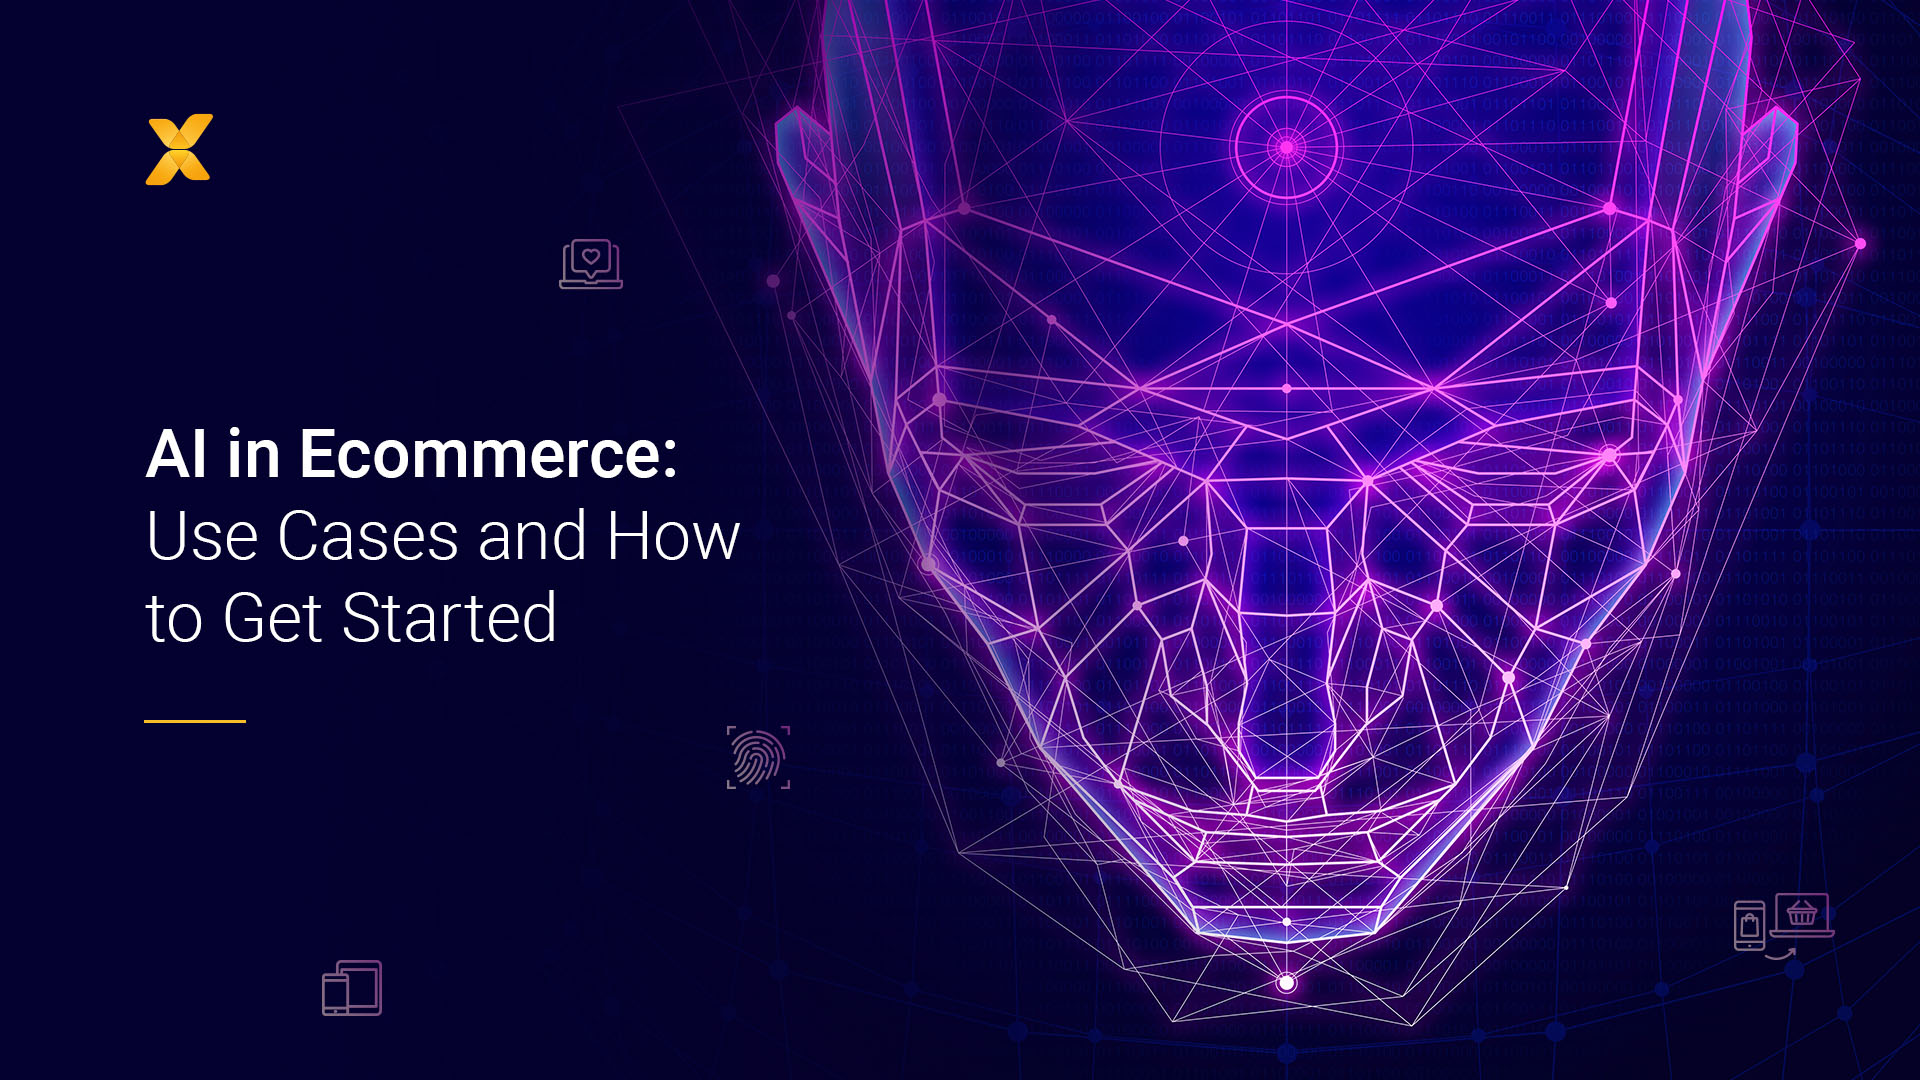 Abstract image with title "AI in Ecommerce."